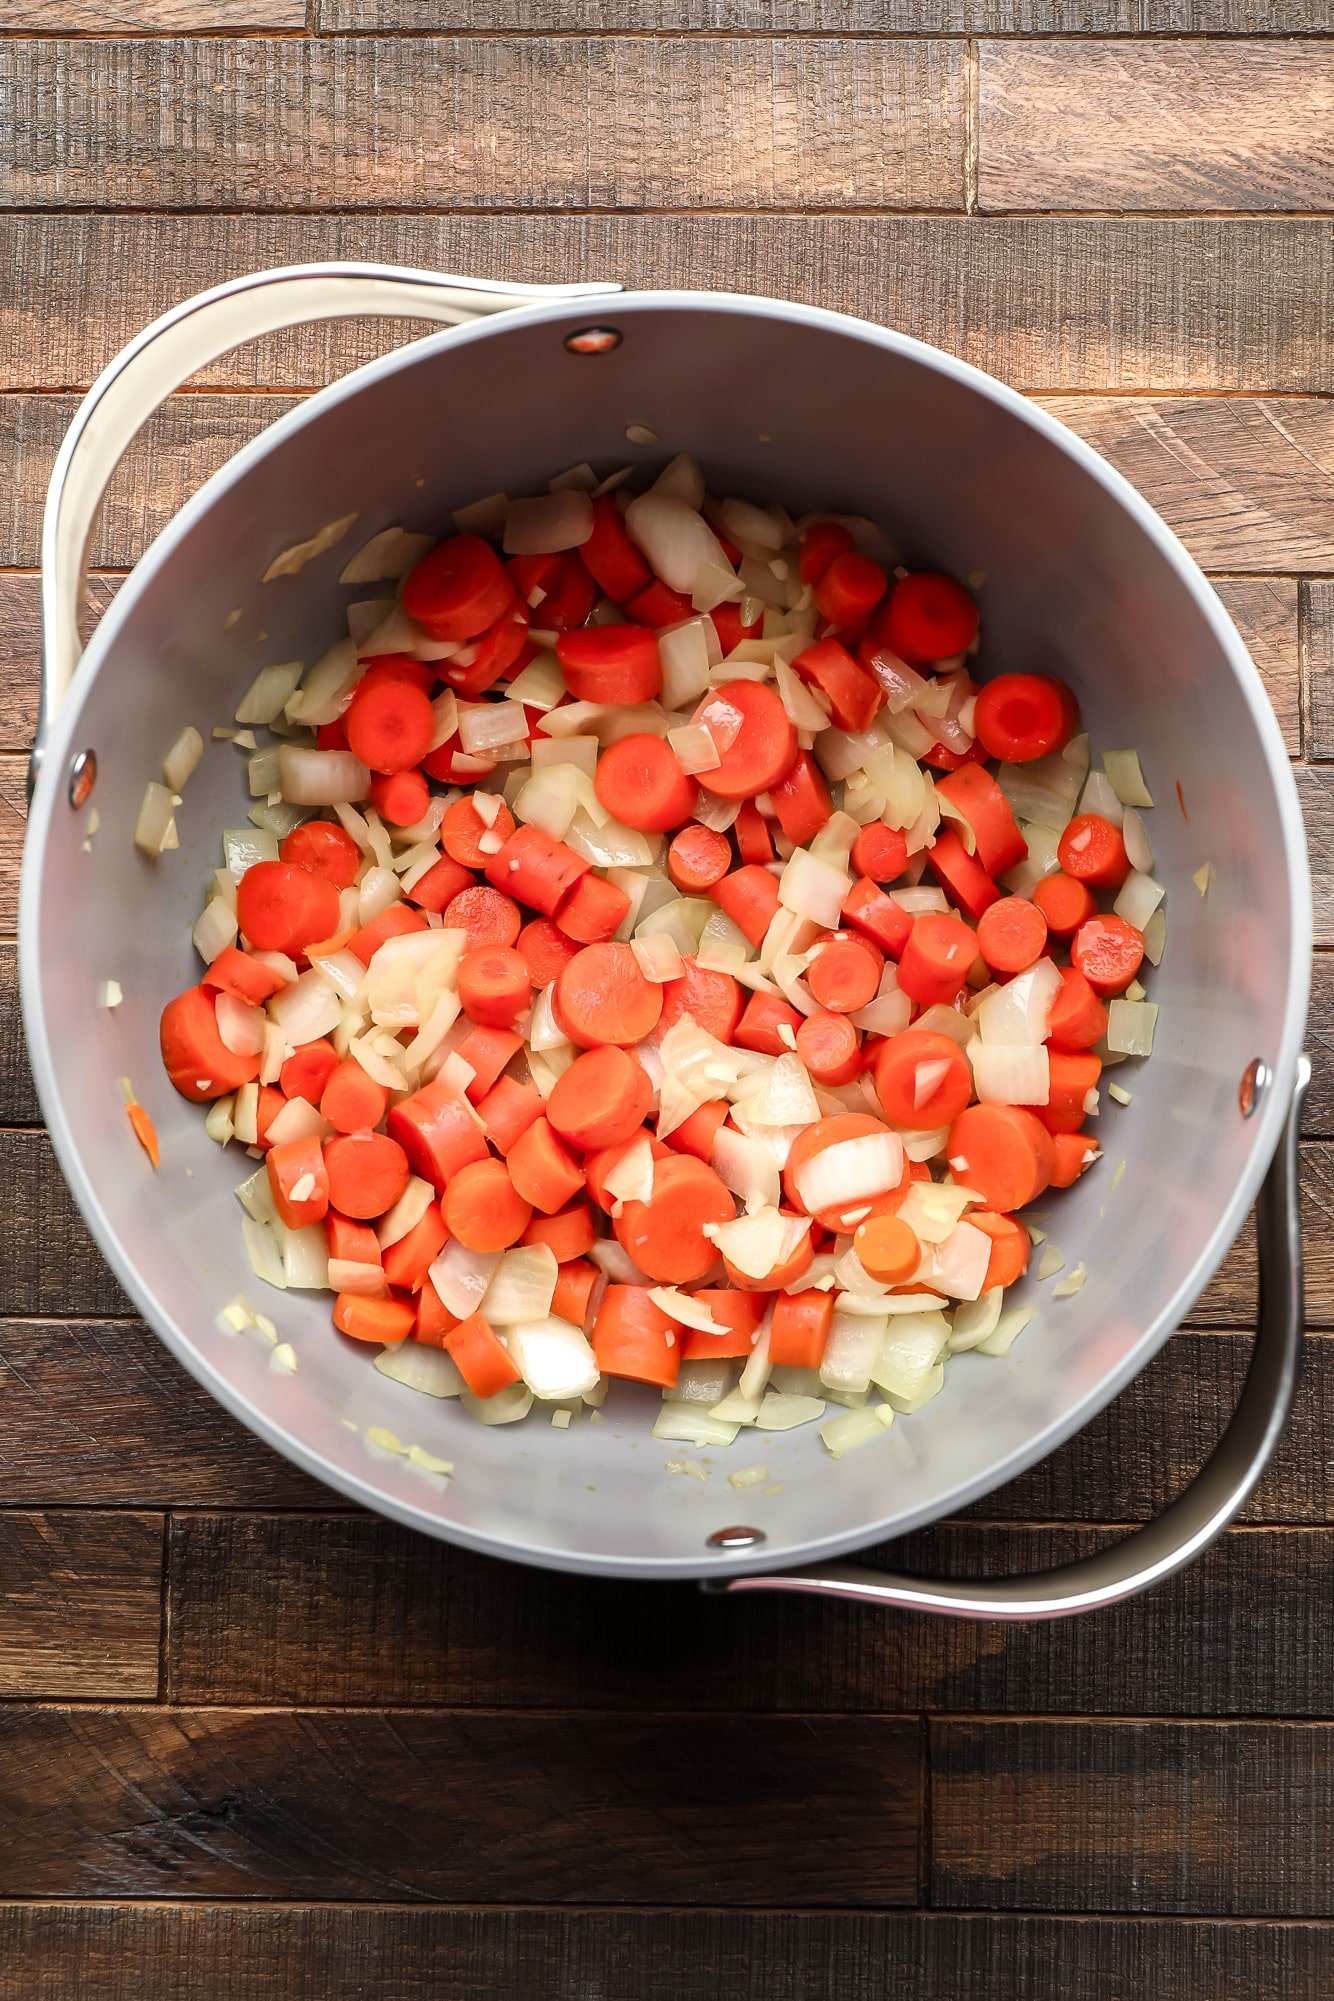 cooking chopped carrots, onions, and garlic in a large grey pot.